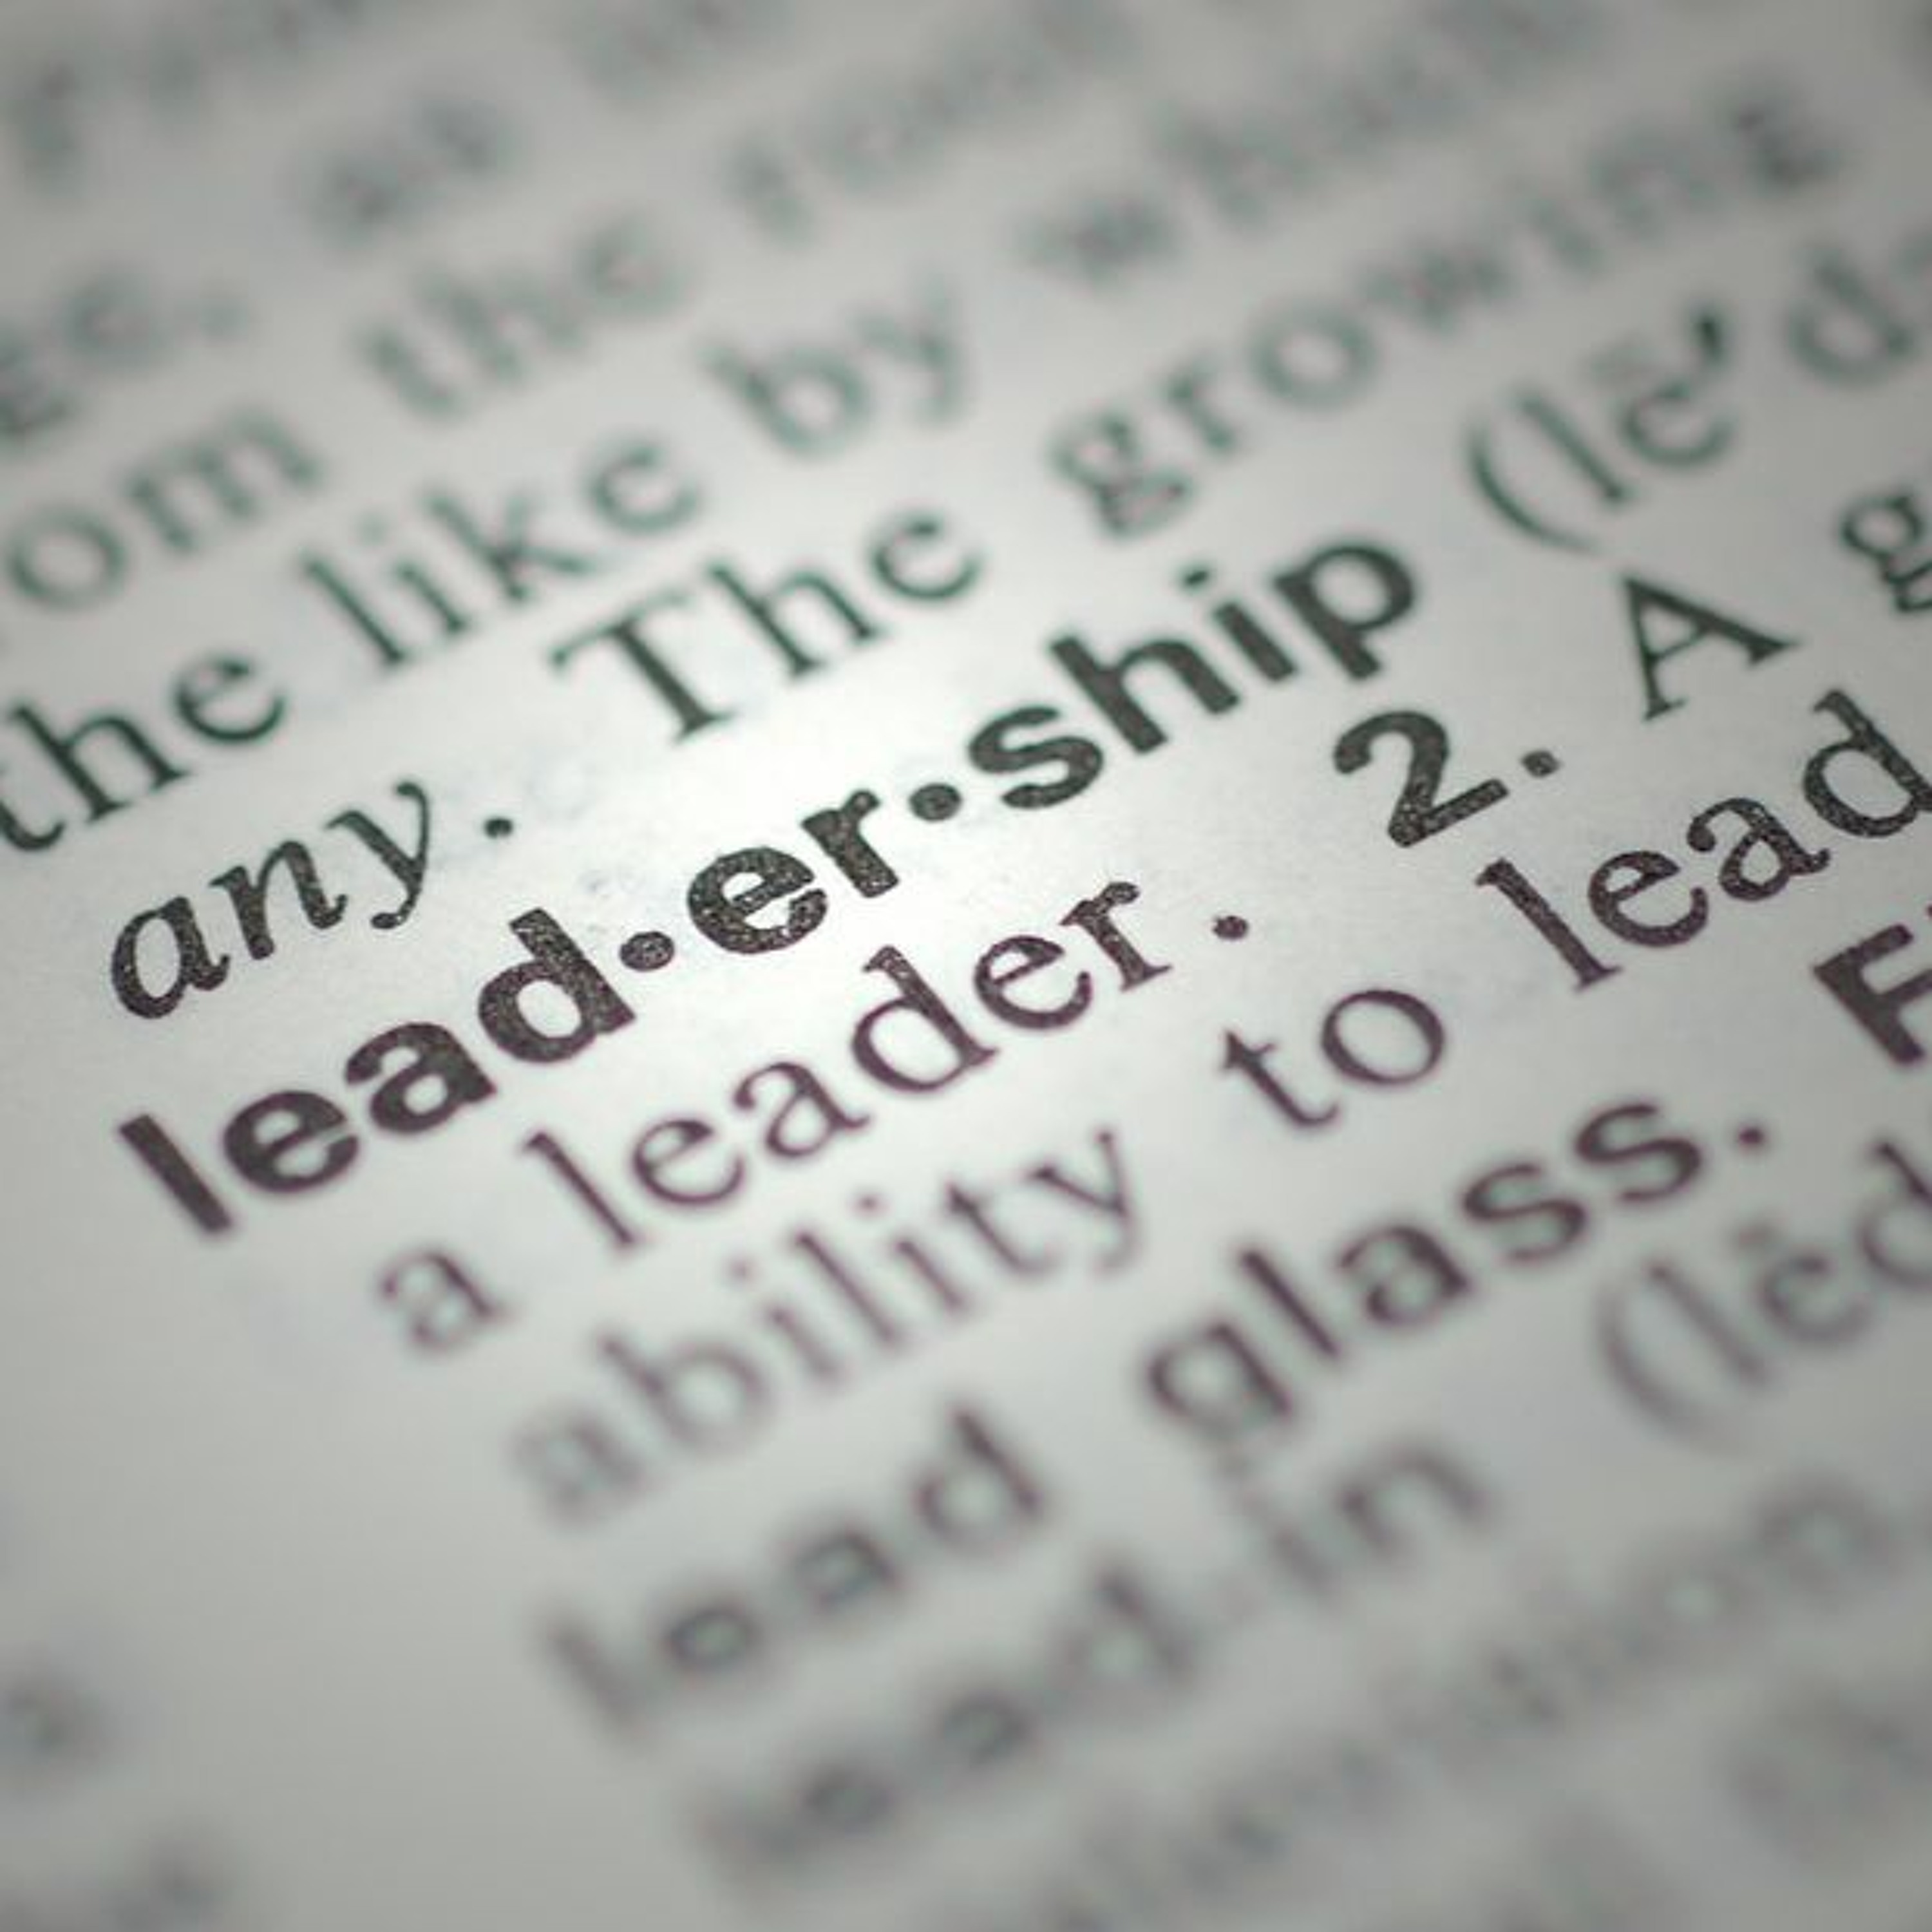 Lessons in Leadership - Responses for the Harvard Business School’s Executive Education Programme